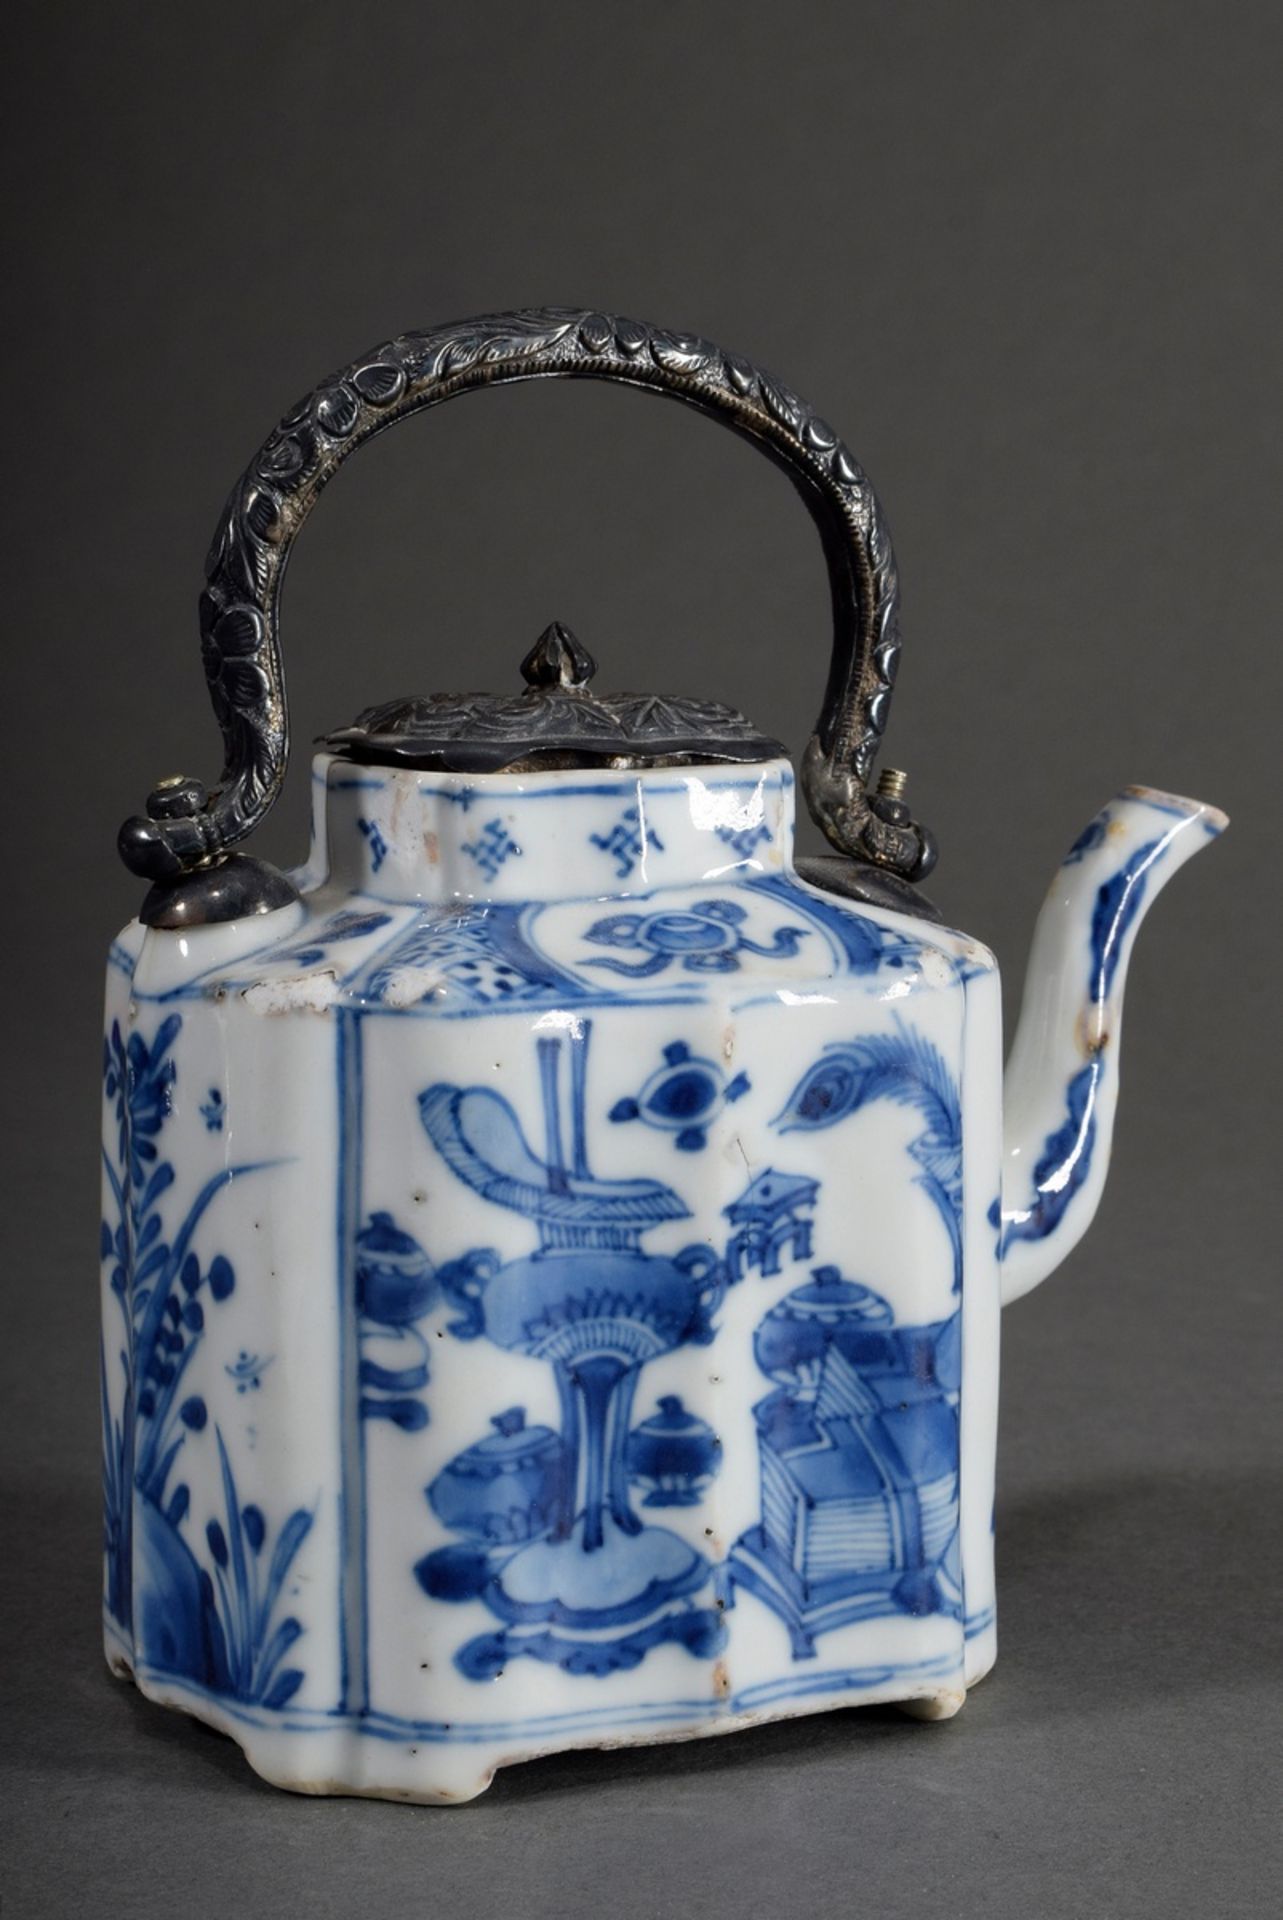 Small Chinese teapot with blue painting decor "Buddhist Symbols and Scholar Objects" on faceted wal - Image 2 of 6